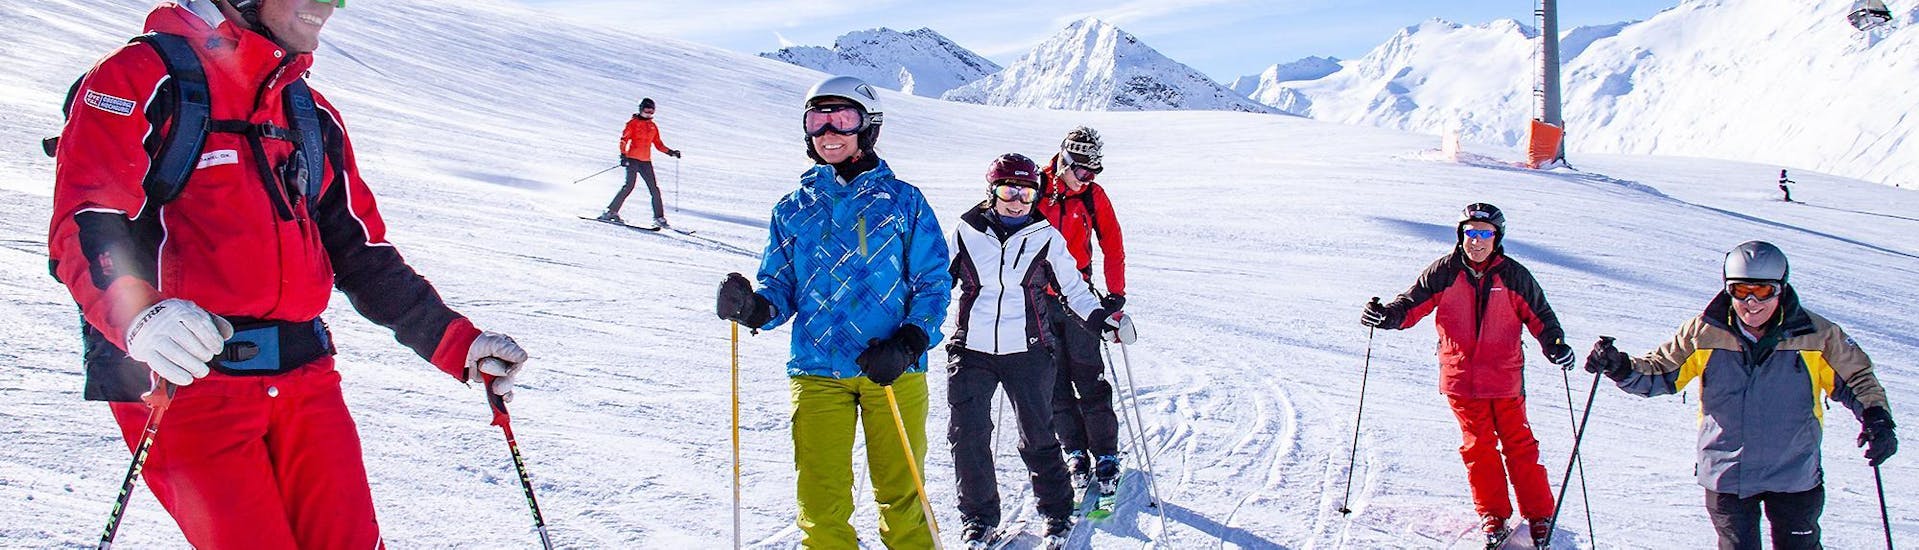 Three adult skiers and their instructor are standing in the snow, smiling during their Adult Ski Lessons for Beginners with skischule Obergurgl.